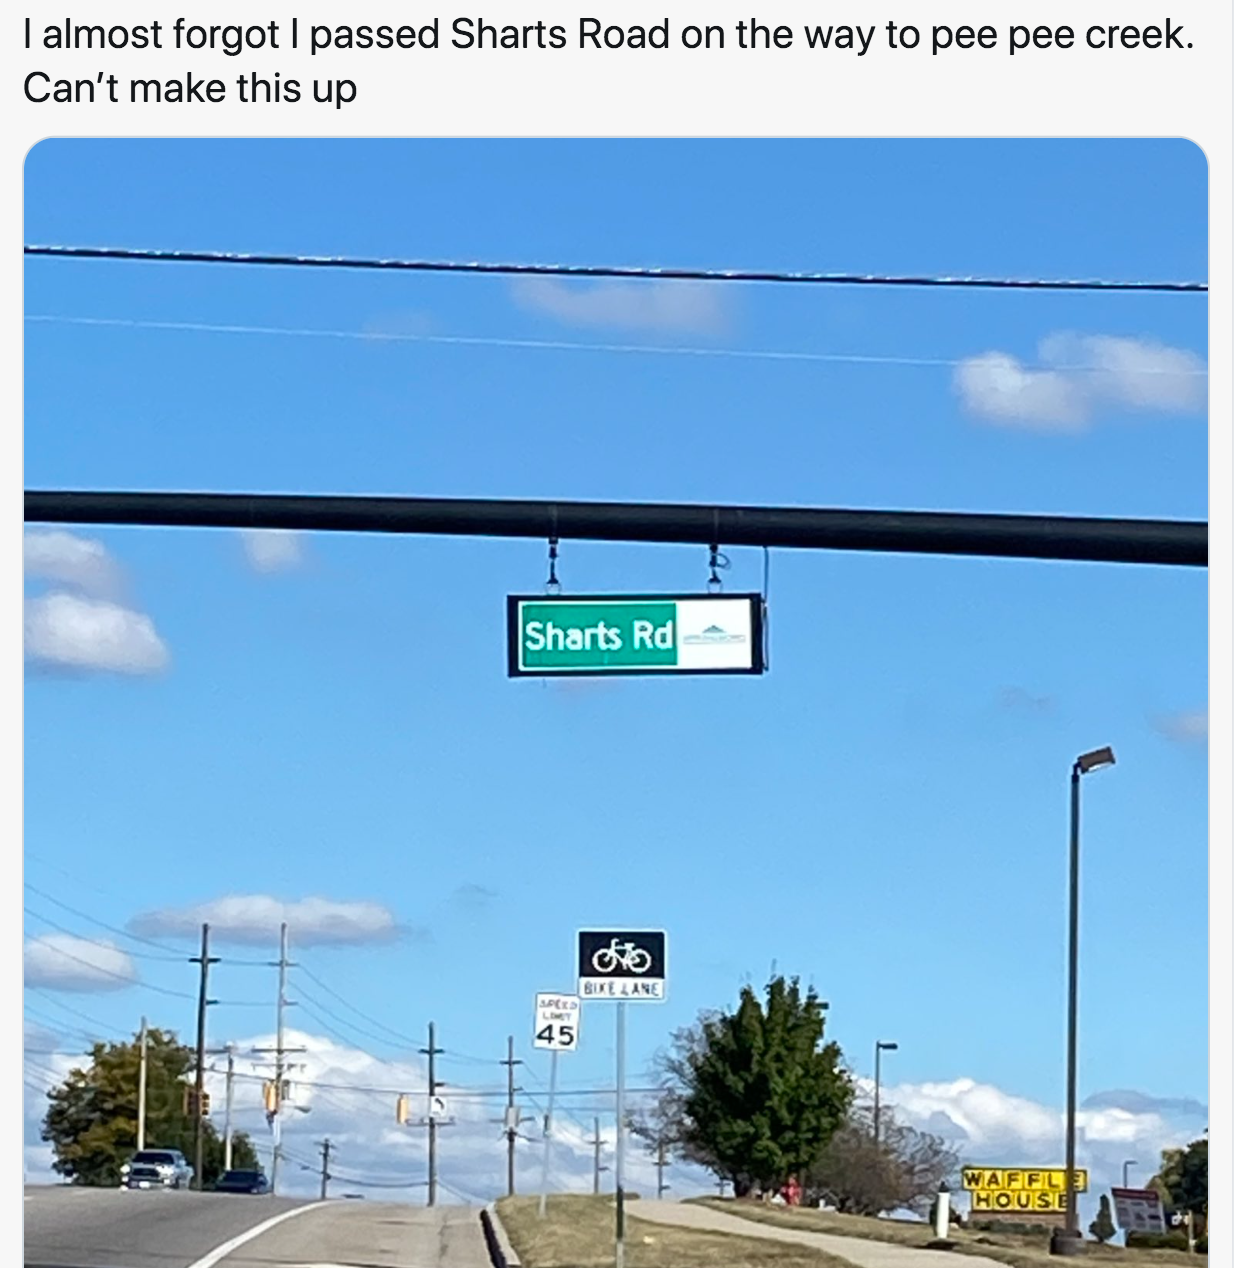 sky - I almost forgot I passed Sharts Road on the way to pee pee creek. Can't make this up Sharts Rd Gmtlane 45 Wall House